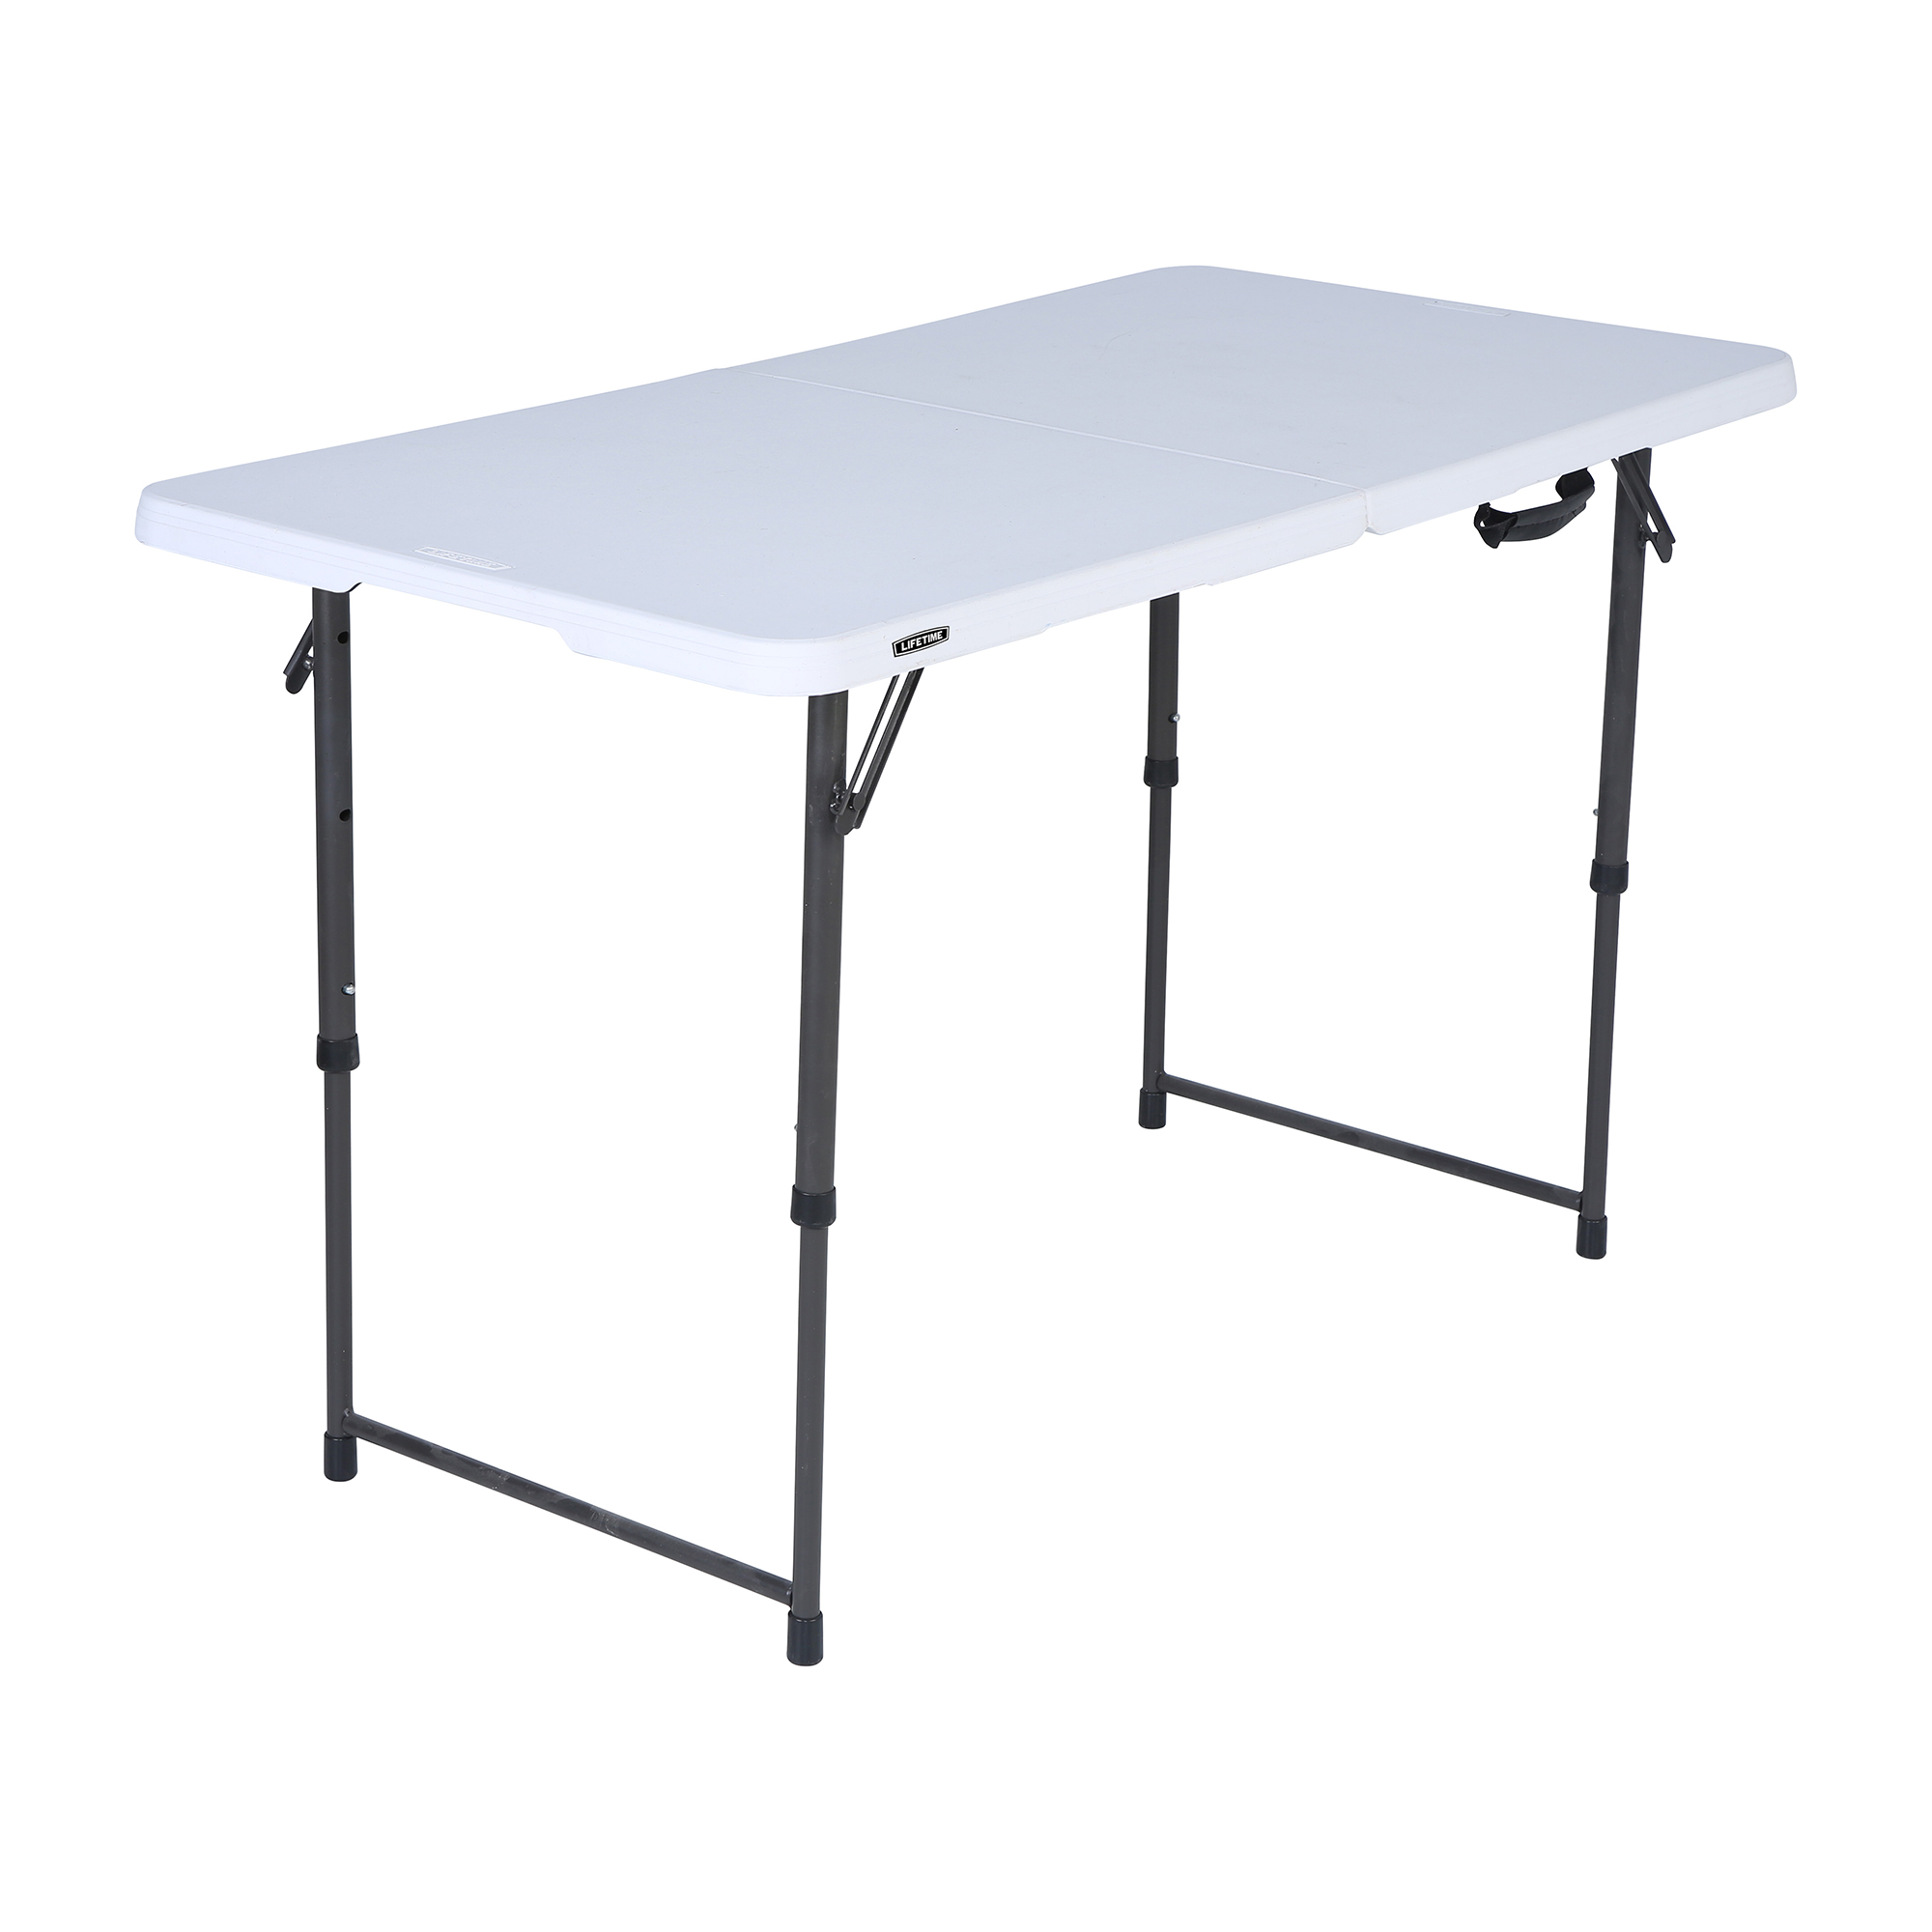 Lifetime, 4-Foot, Height Adjustable Fold-In-Half Table, Rectangle, Residential, White Granite Colour, LFT-80509